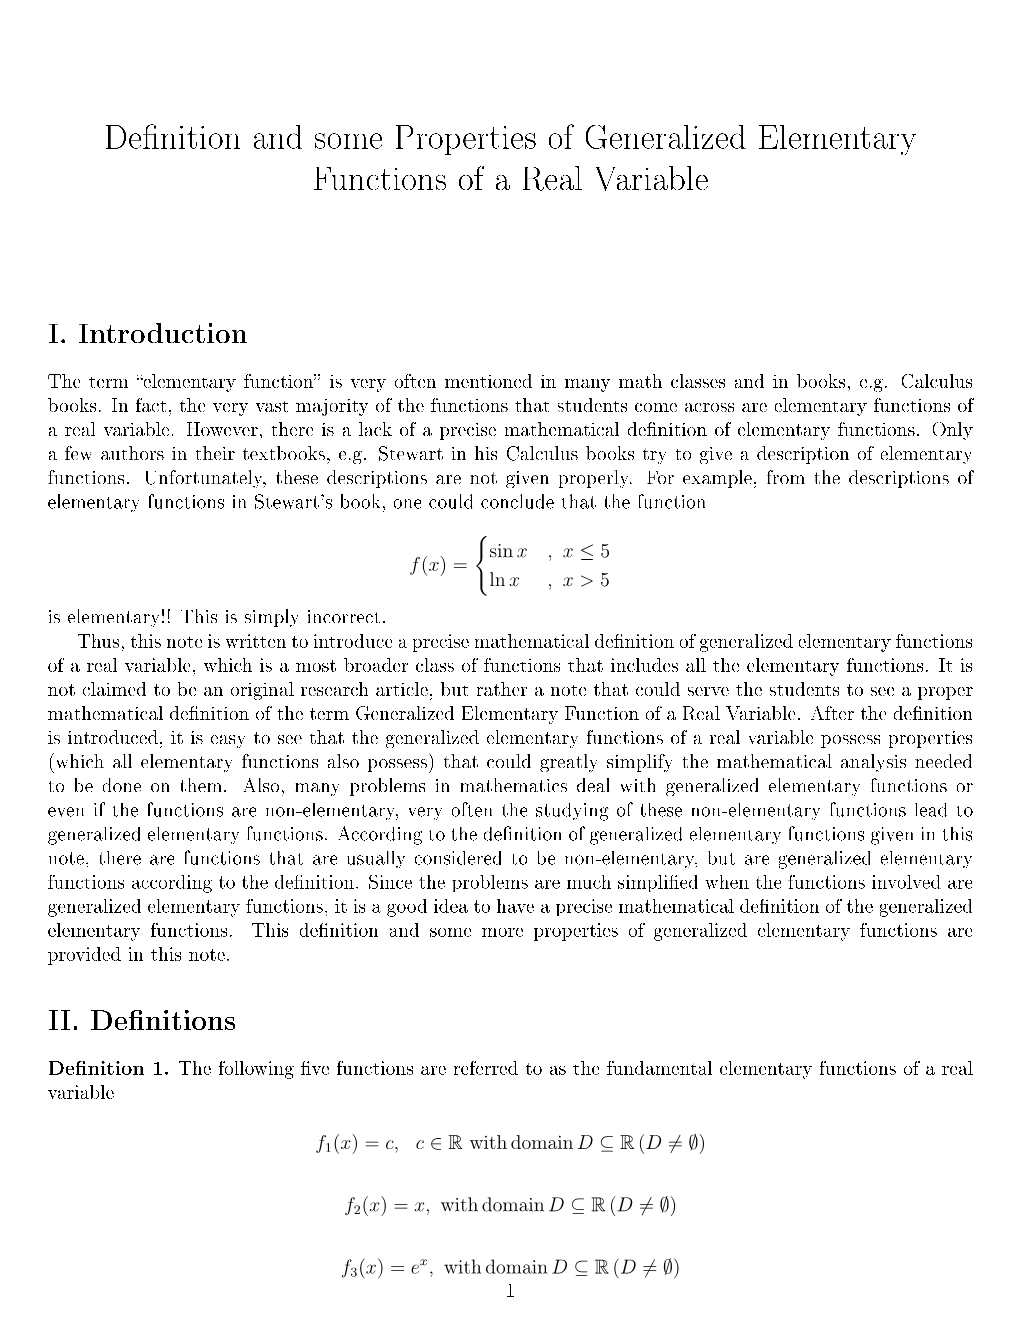 De Nition and Some Properties of Generalized Elementary Functions